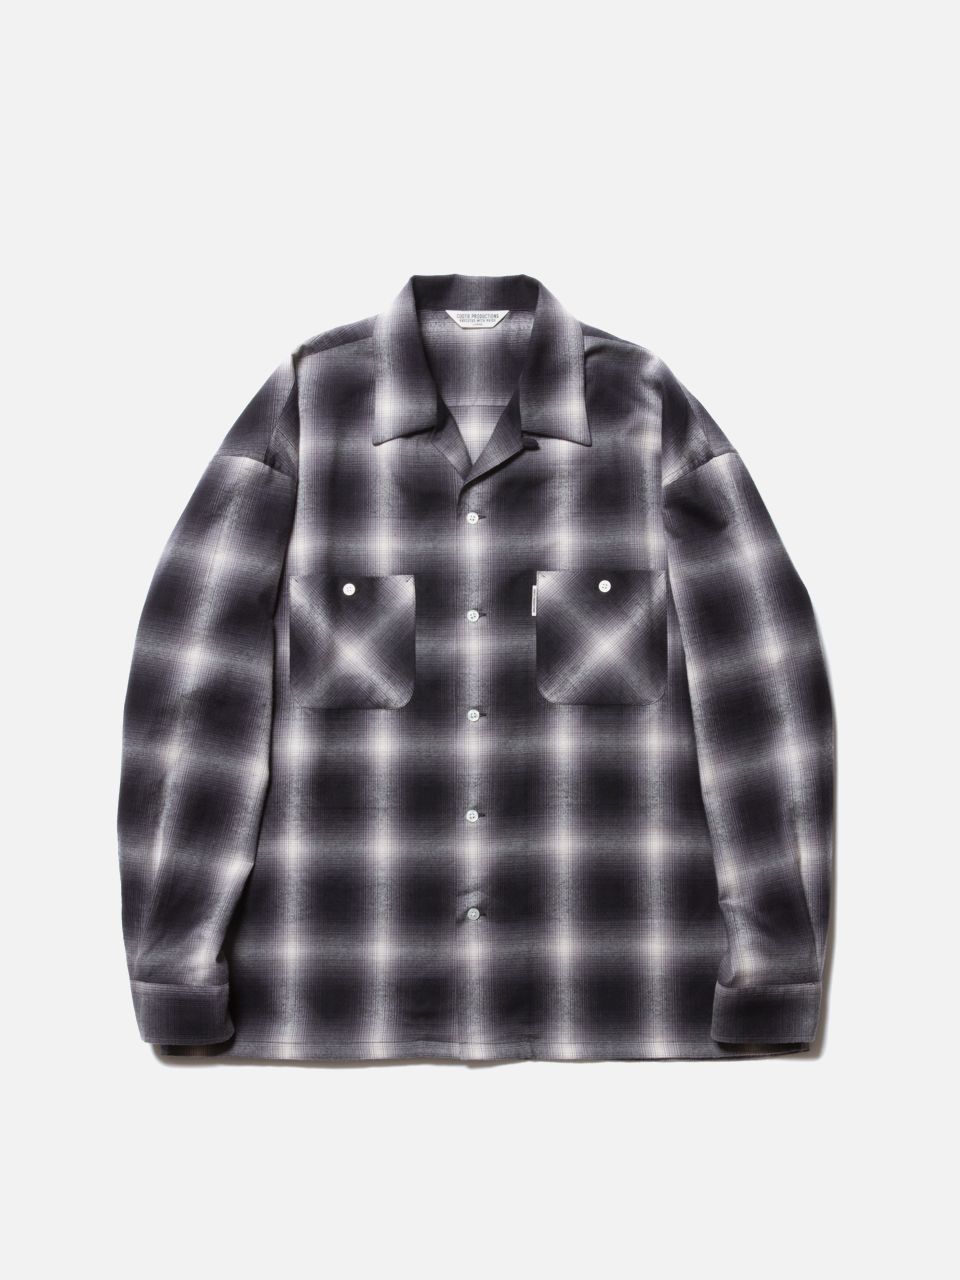 COOTIE クーティ 通販 19SS Ombre Check Open-Neck L/S Shirt